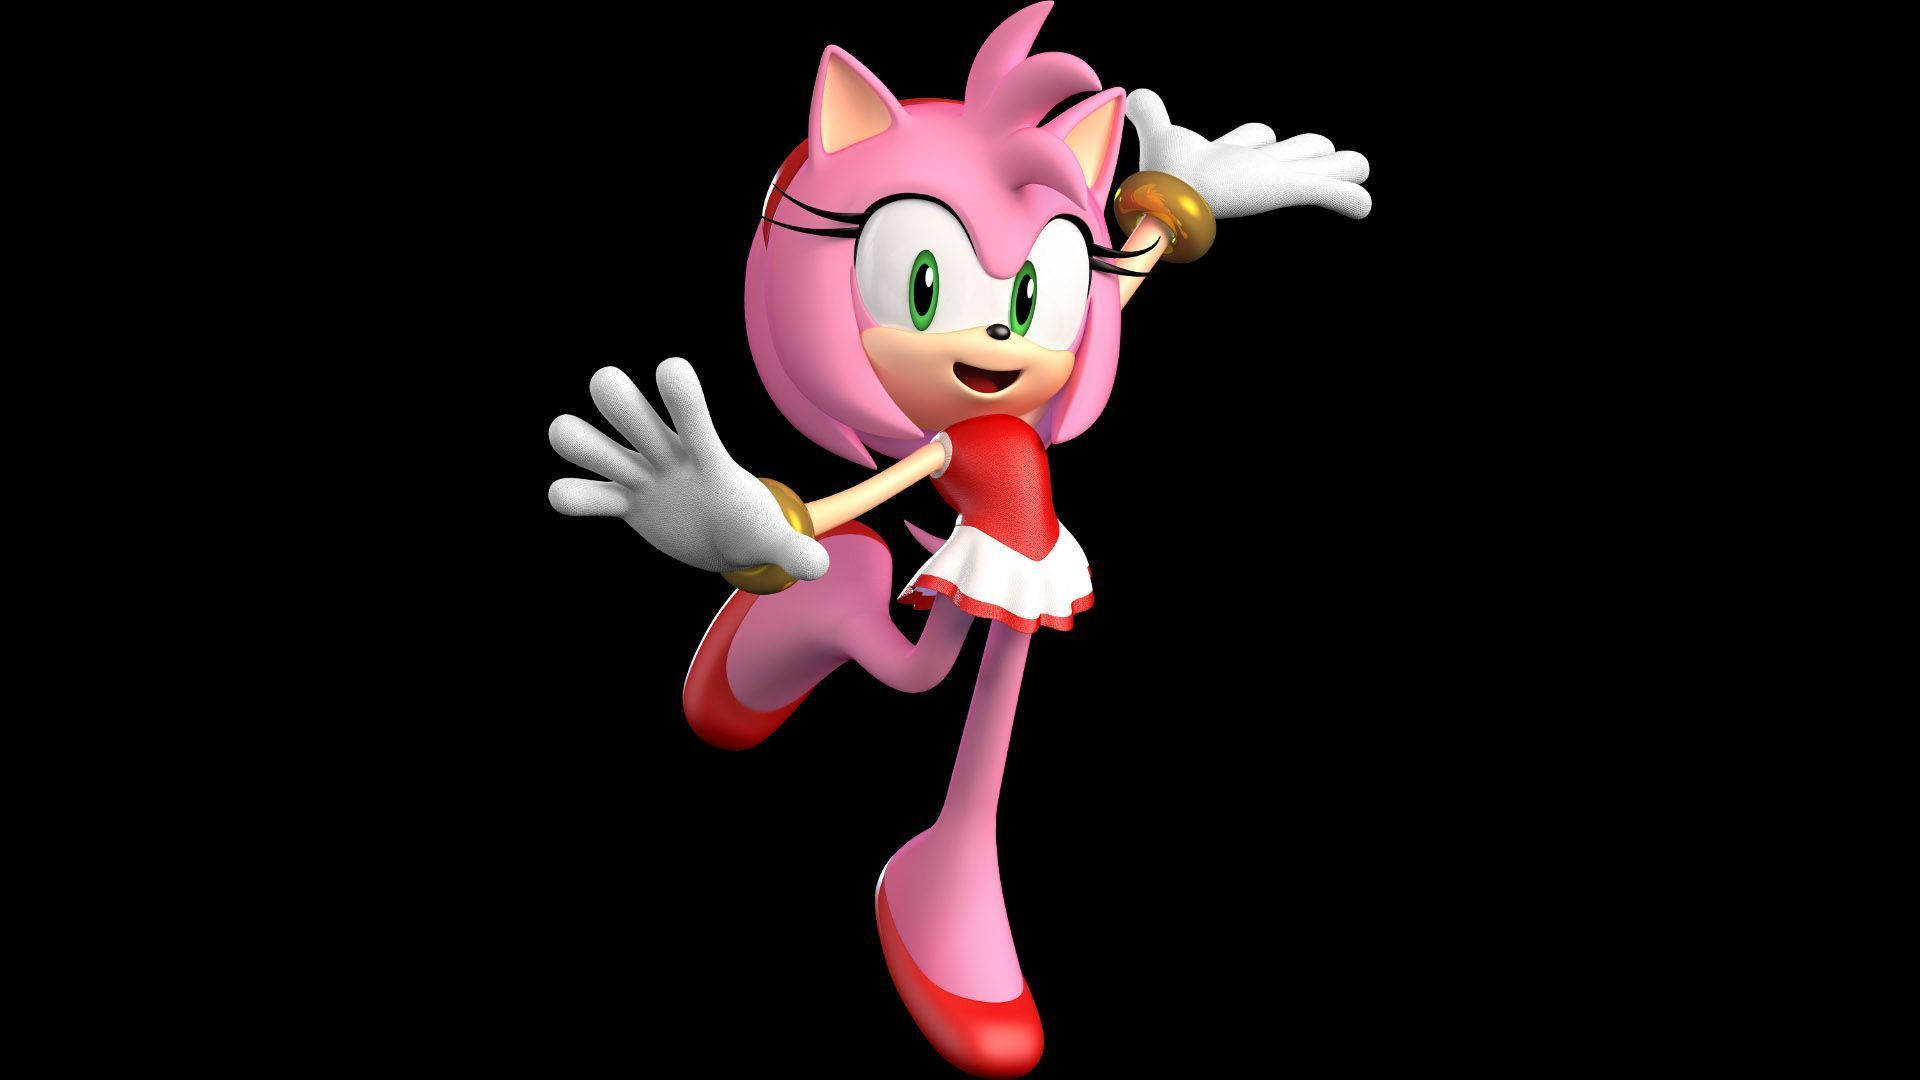 Amy Rose 2012 Olympic Game Wallpaper